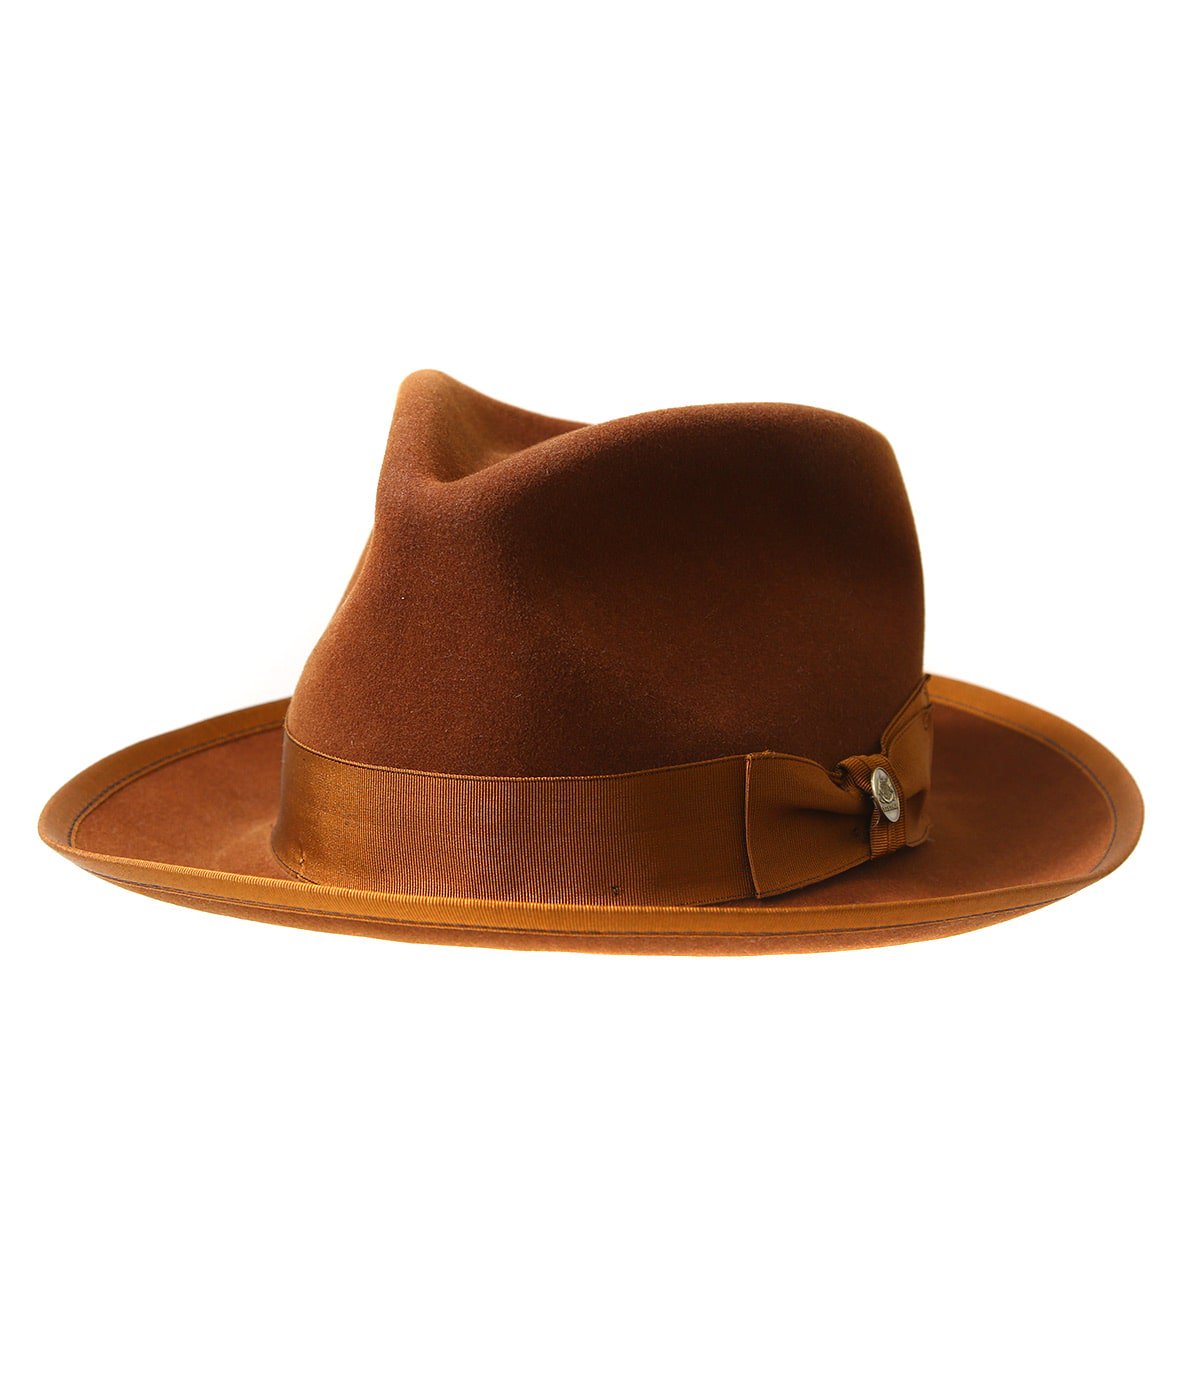 STETSON ステットソン WHIPPET Ver.3 キムタク-